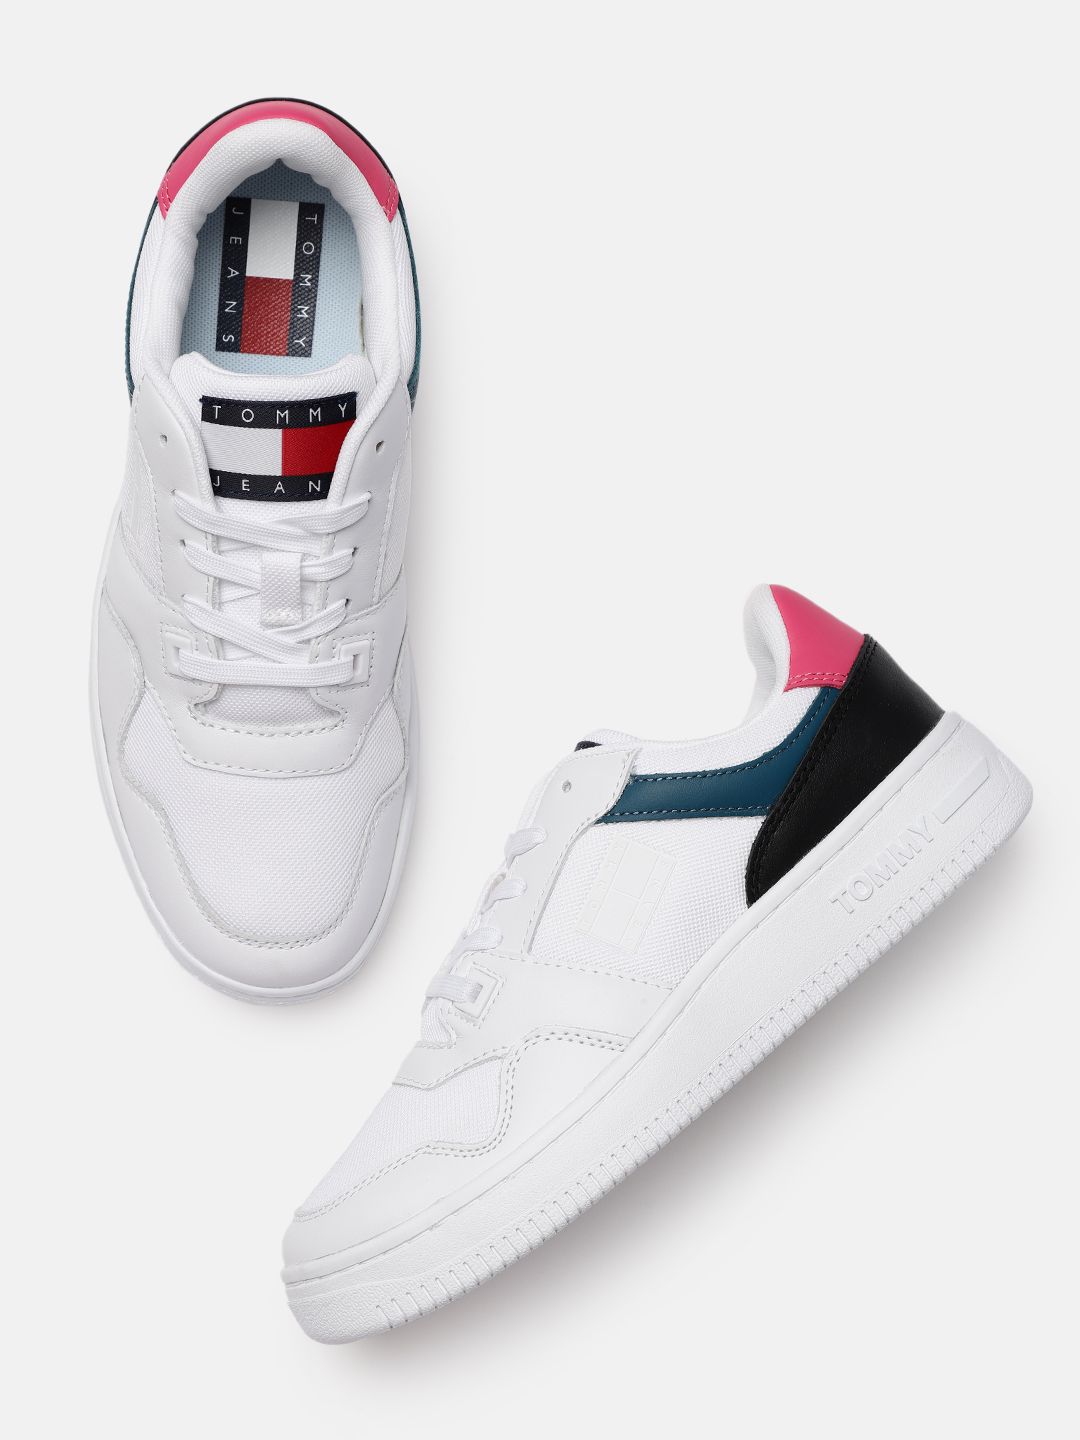 Tommy Hilfiger Jeans Women White Colourblocked Mix Basket Regular Sneakers Price in India